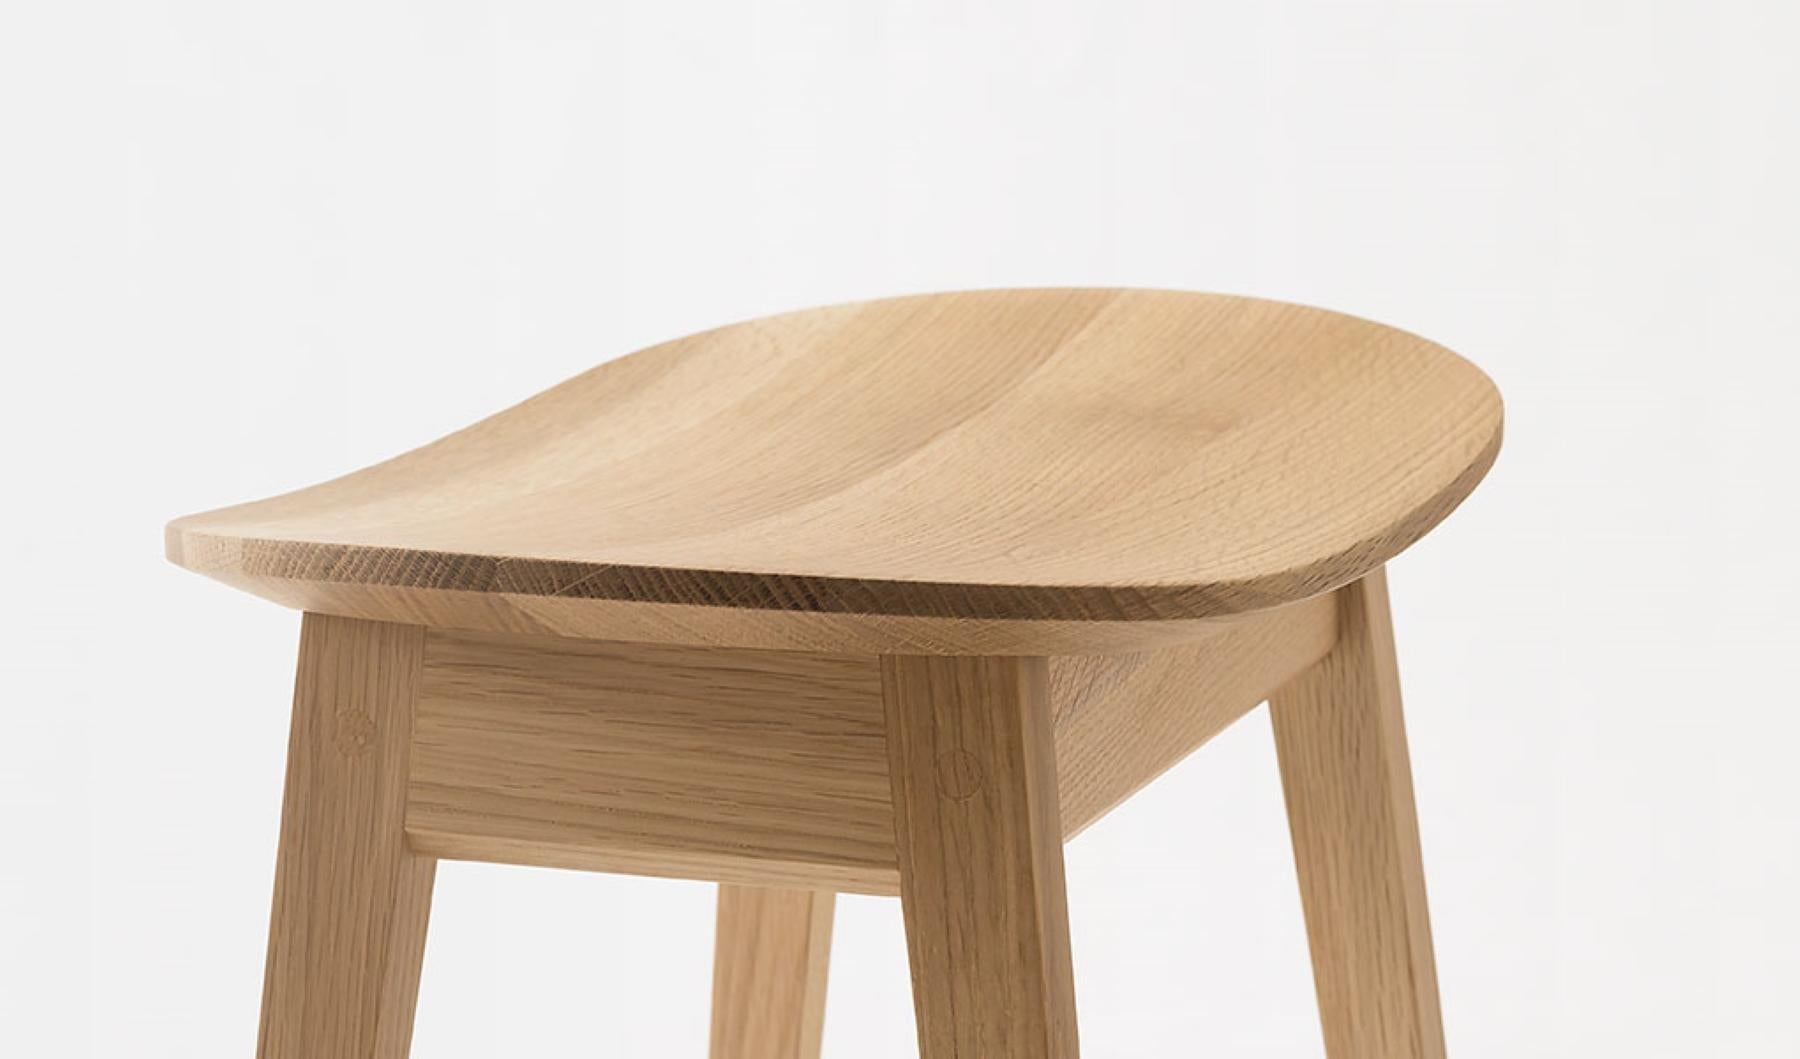 HIDA Japan Suwari Series Modernist Stool with Wooden Seat in Japanese Oak In New Condition For Sale In Llanbrynmair, GB